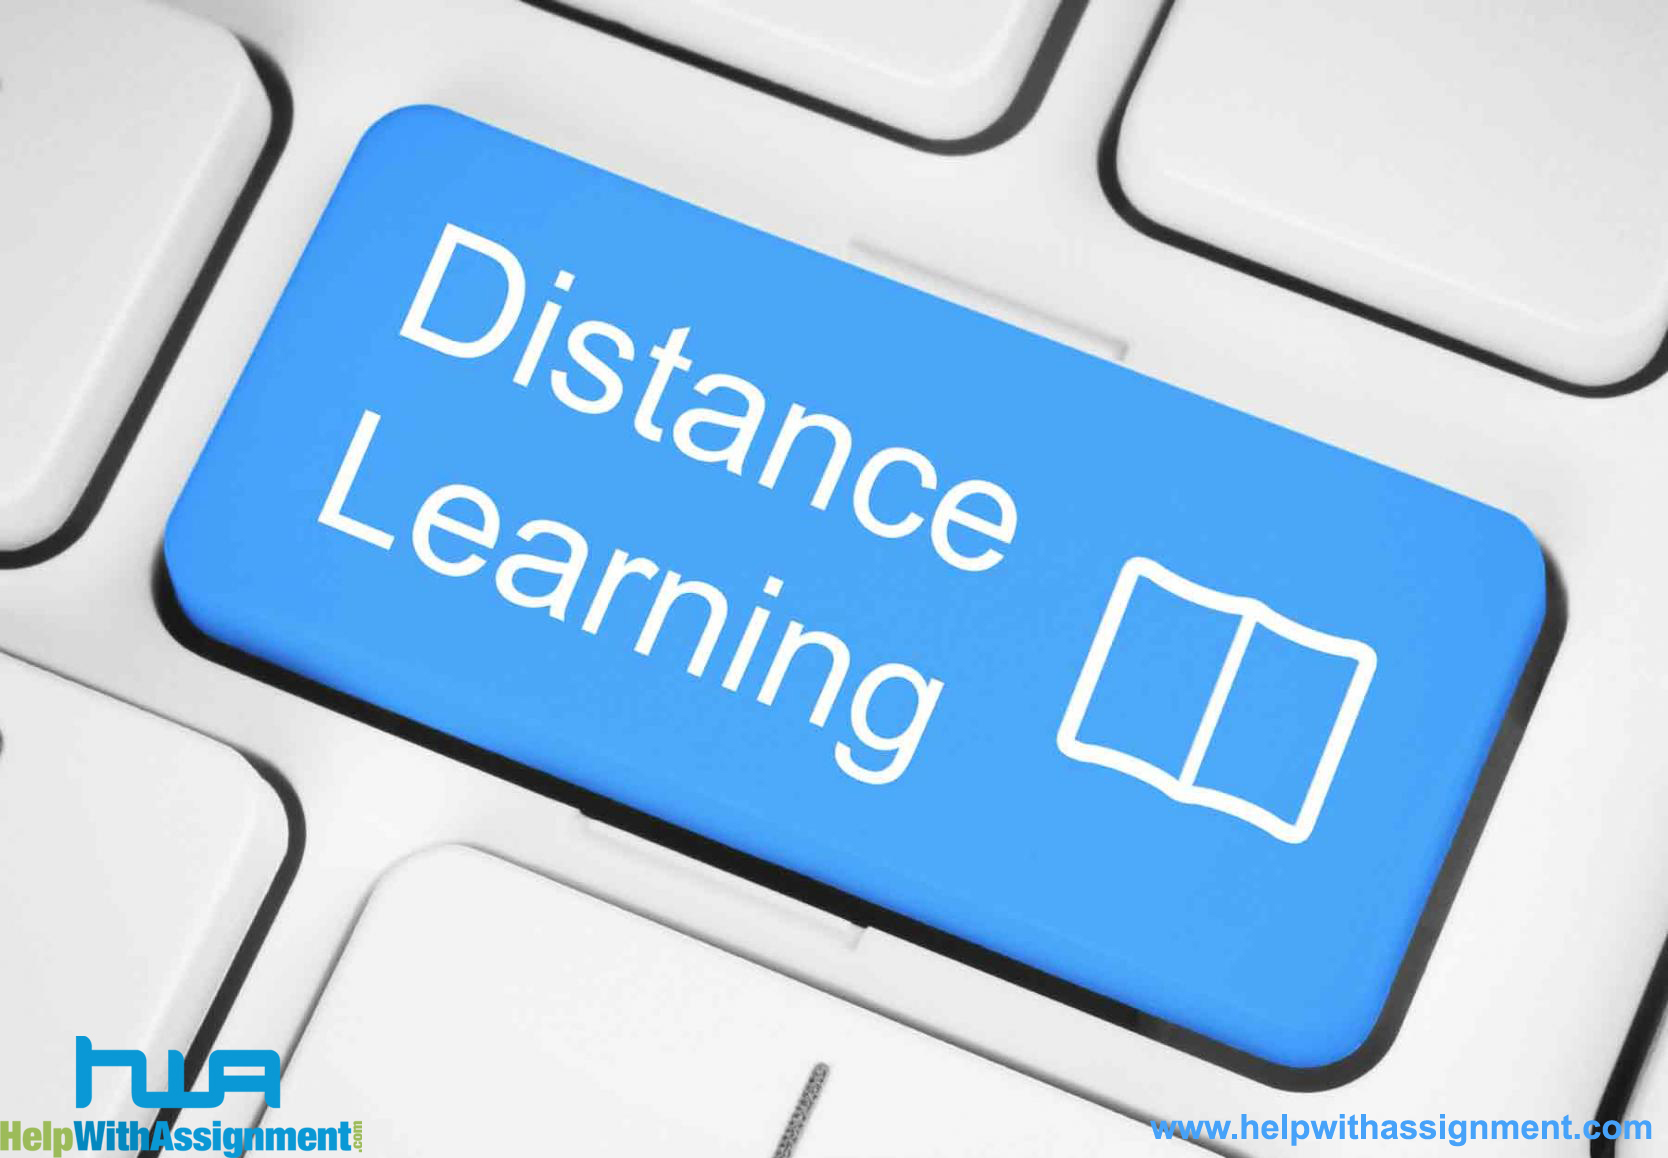 How is Distance Learning Transforming Higher Education?